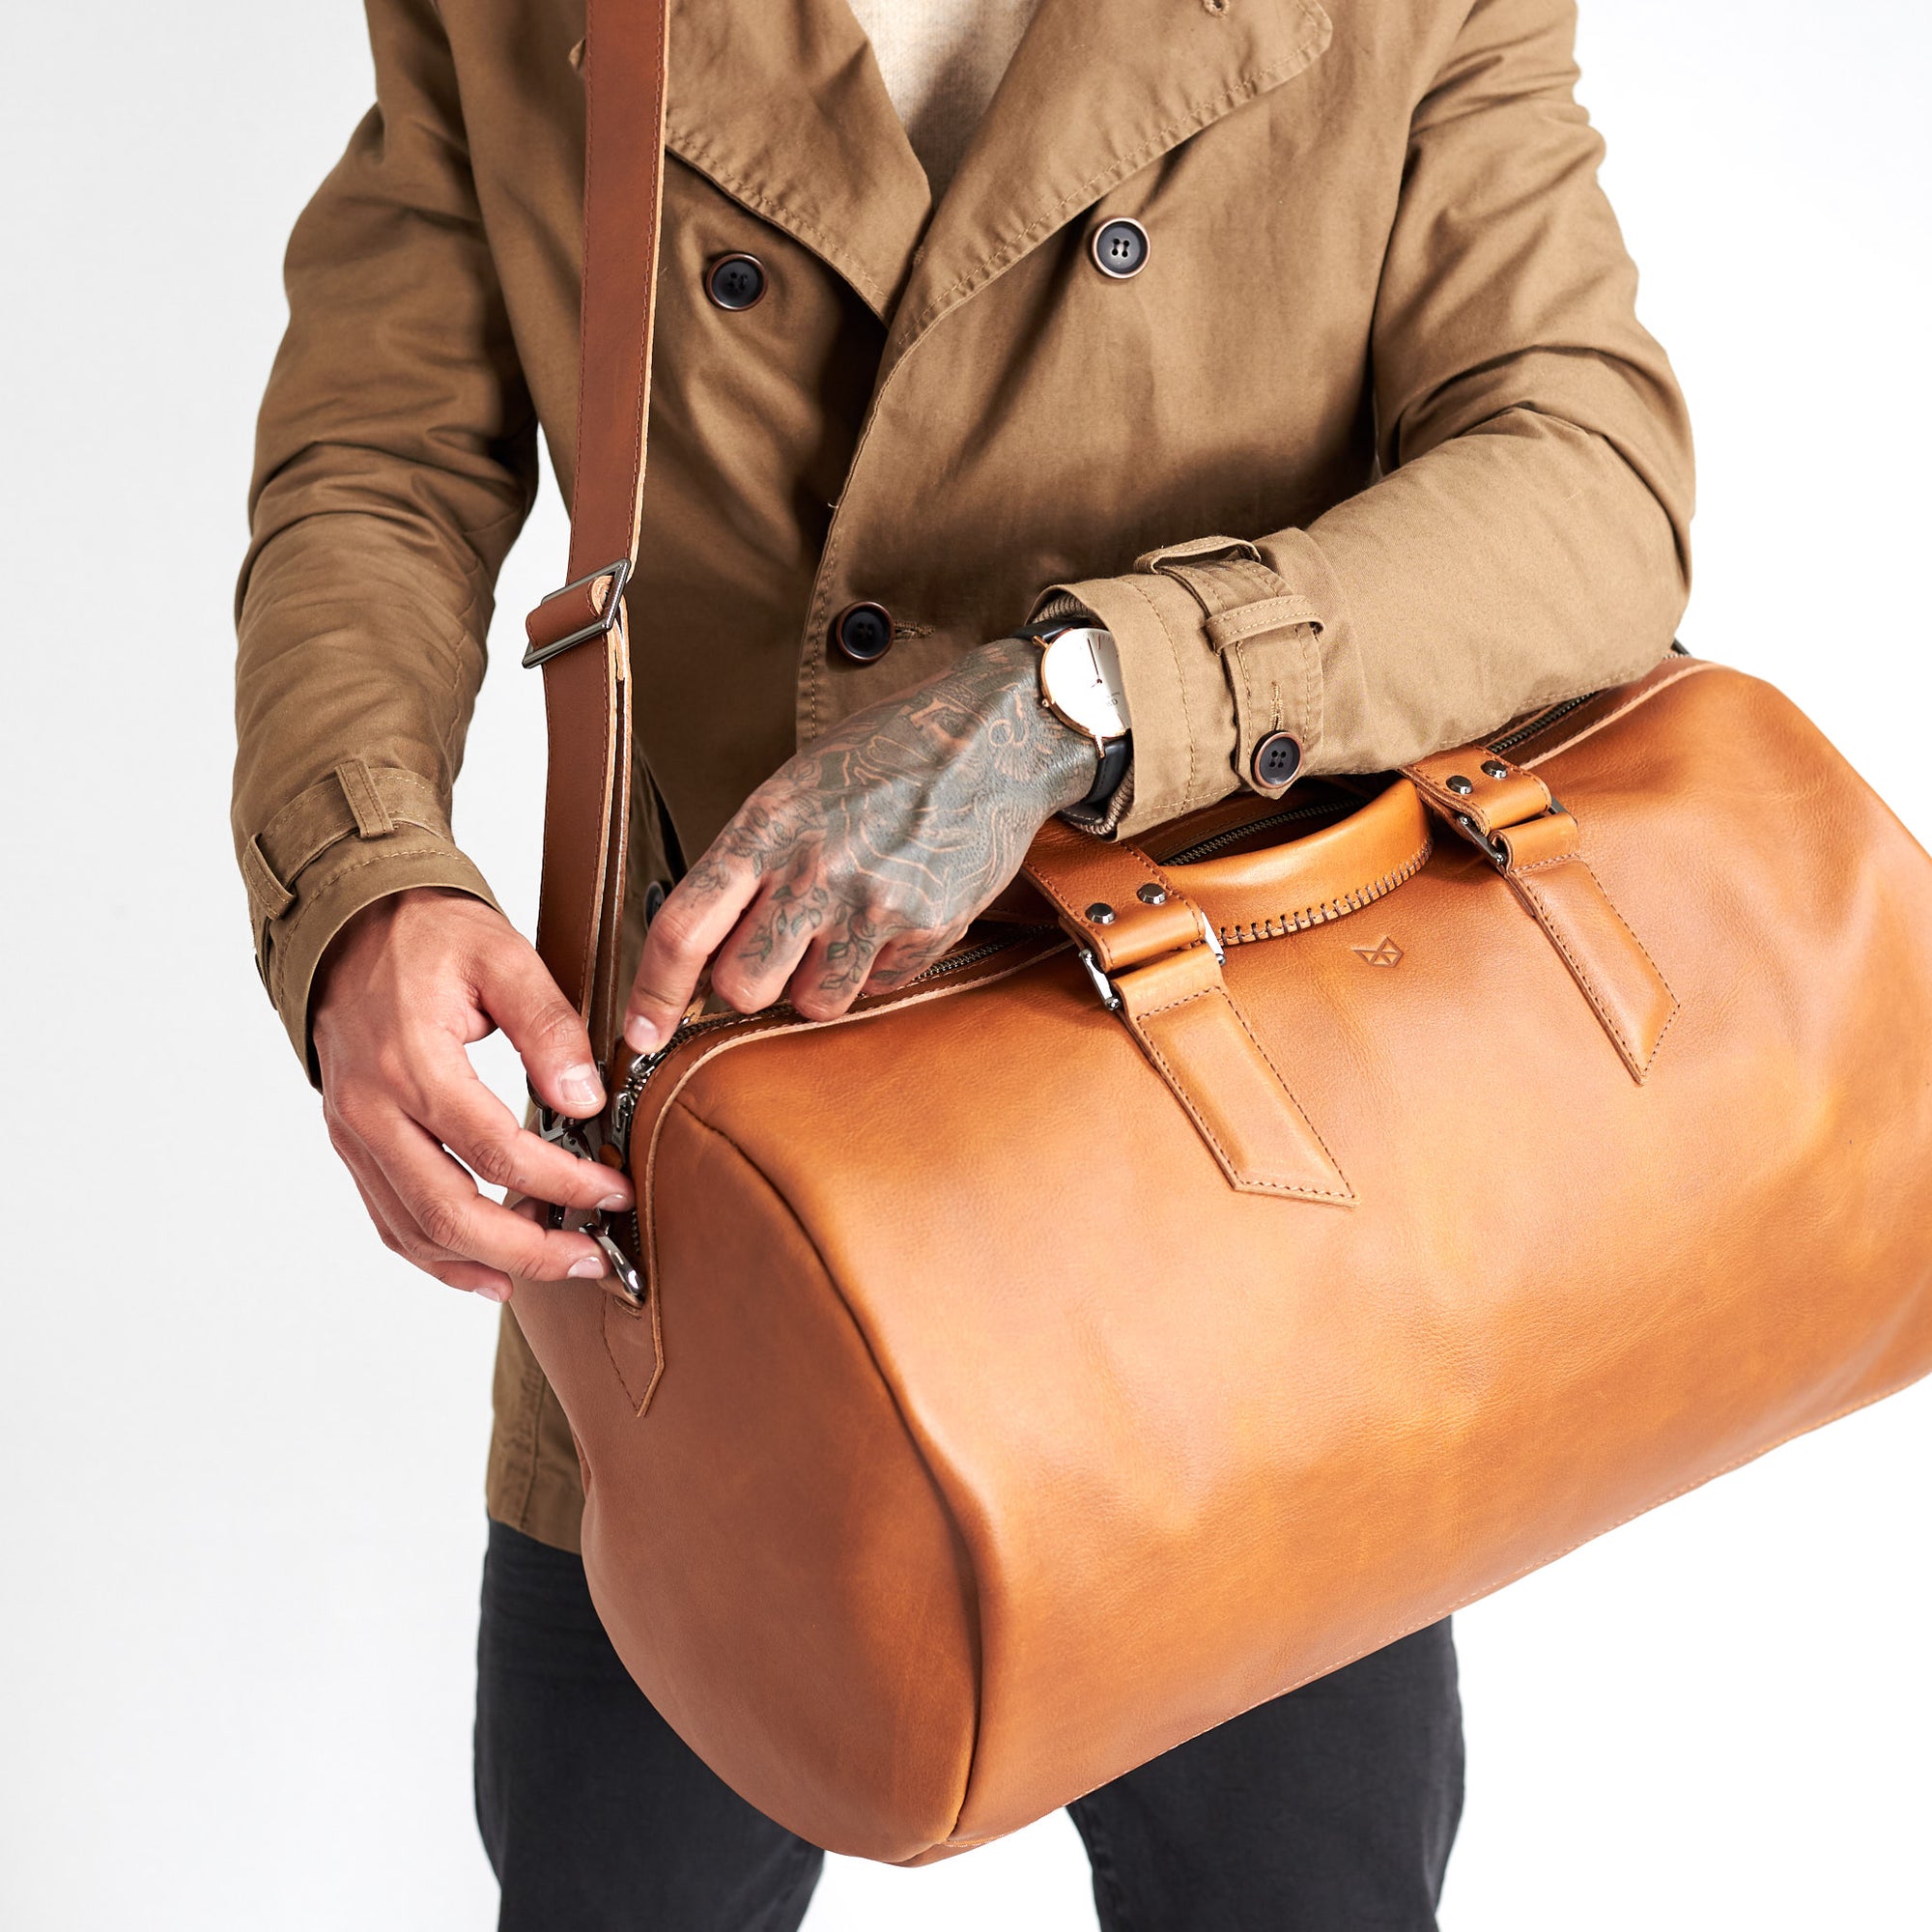 Substantial duffle bag tan by Capra Leather. Detail bag zippers style.